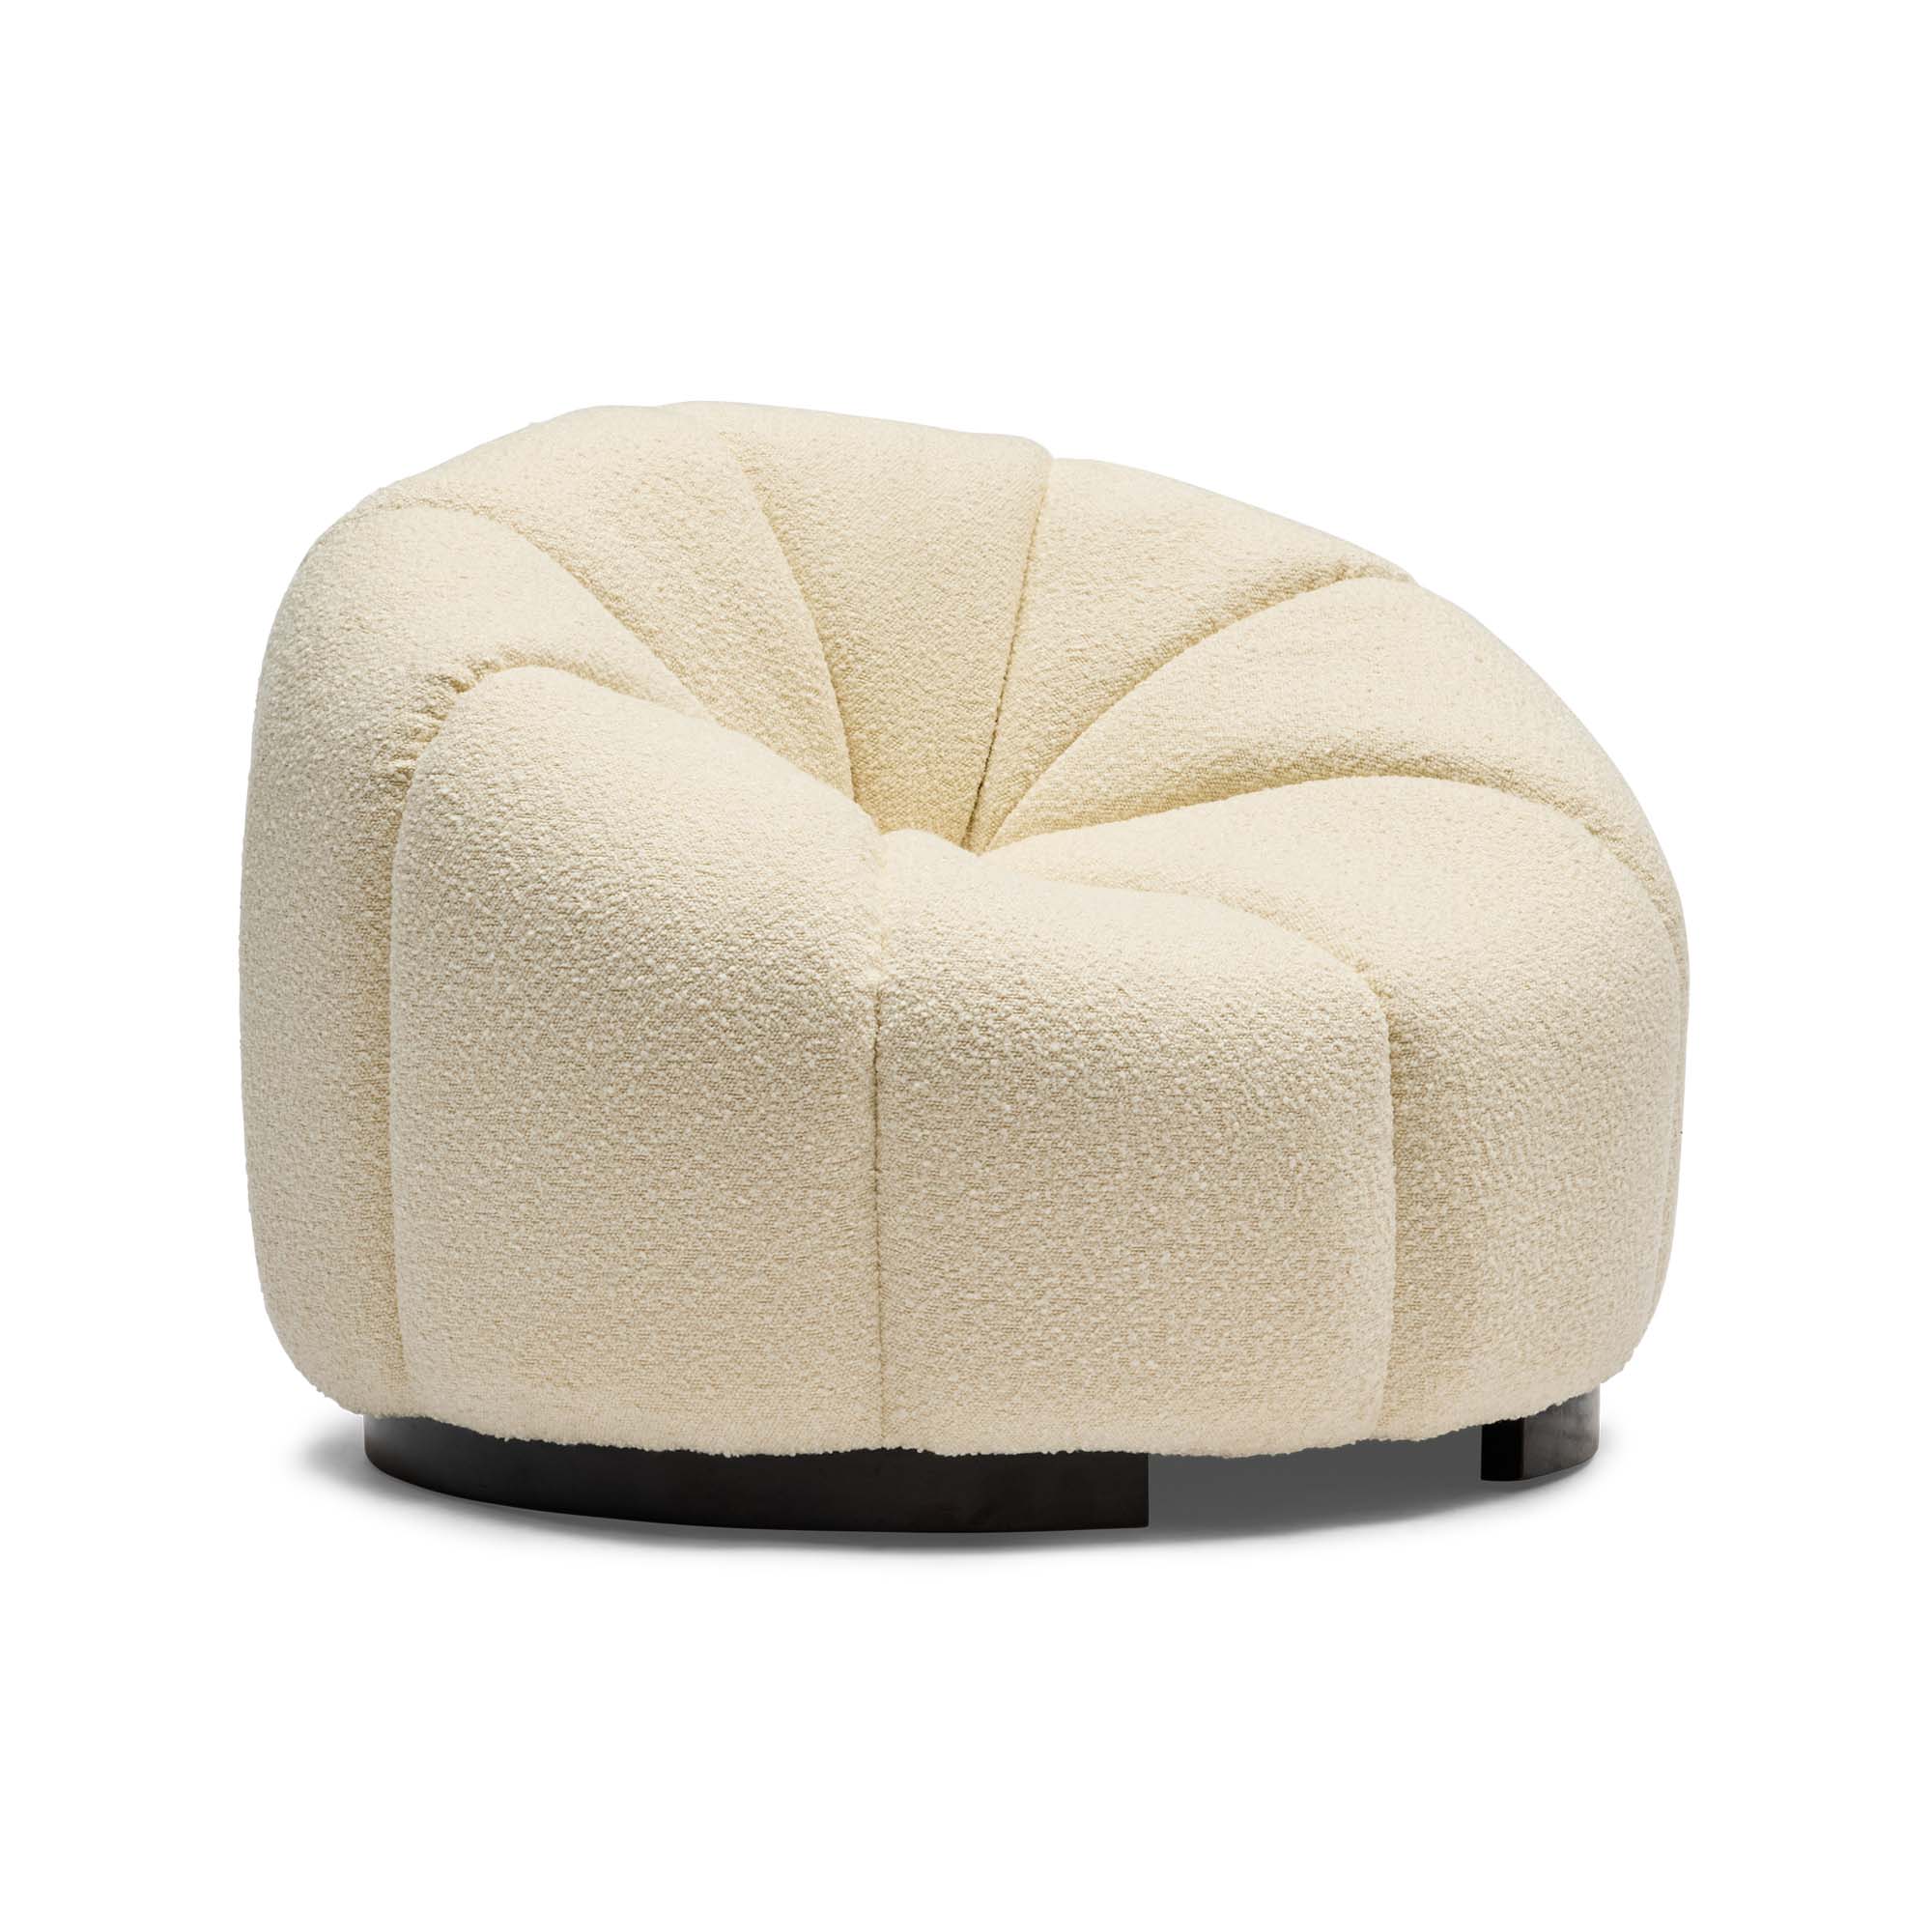 Modena Occasional Chair Ivory Sample